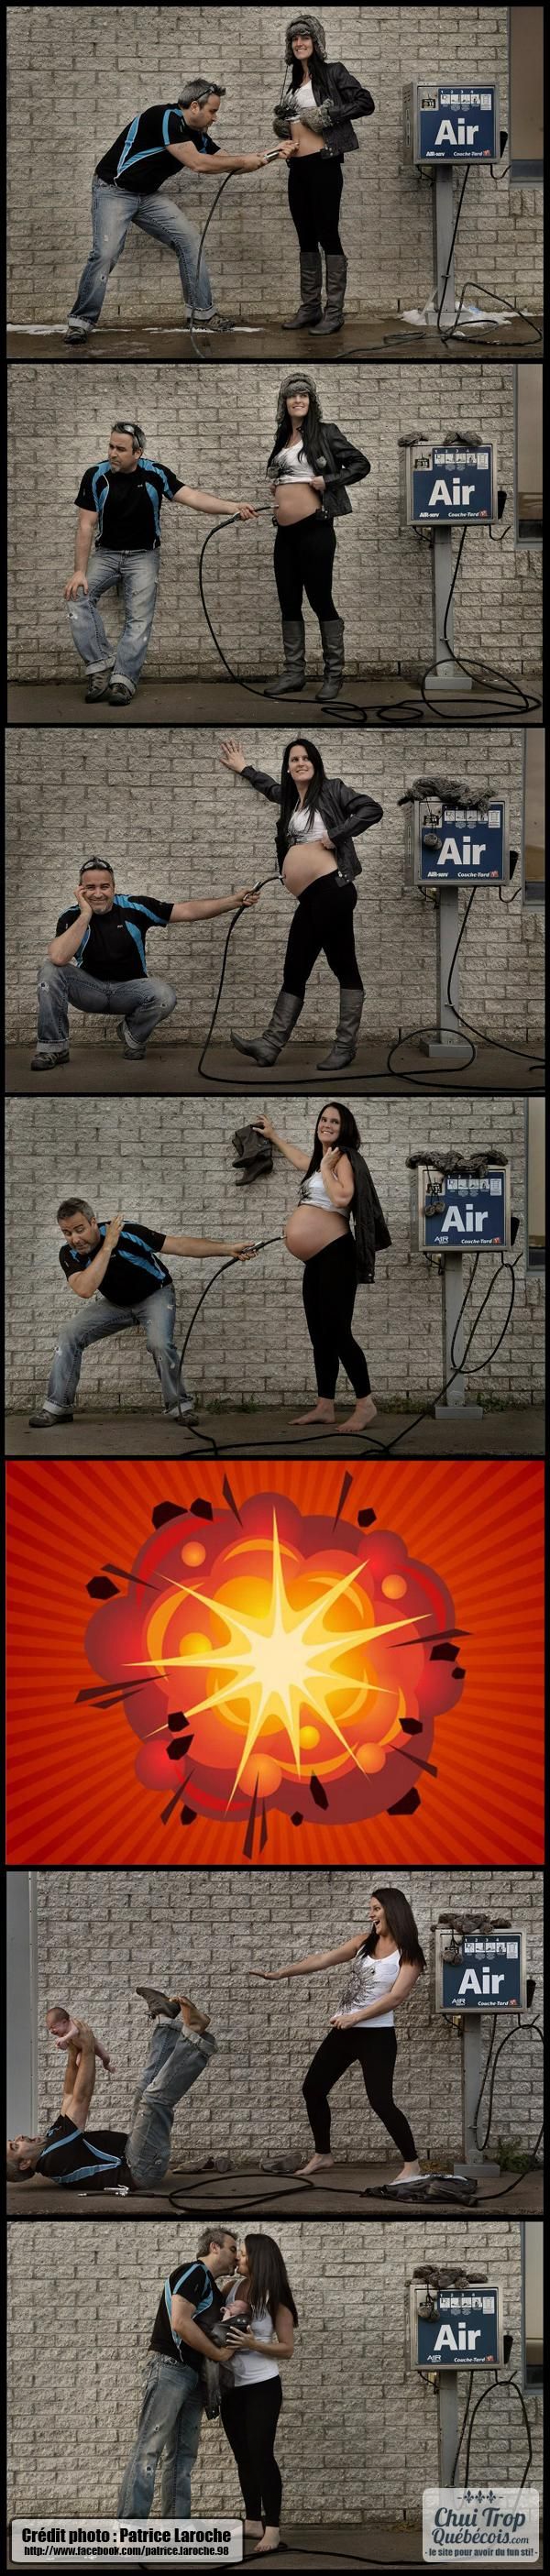 How babies are made.